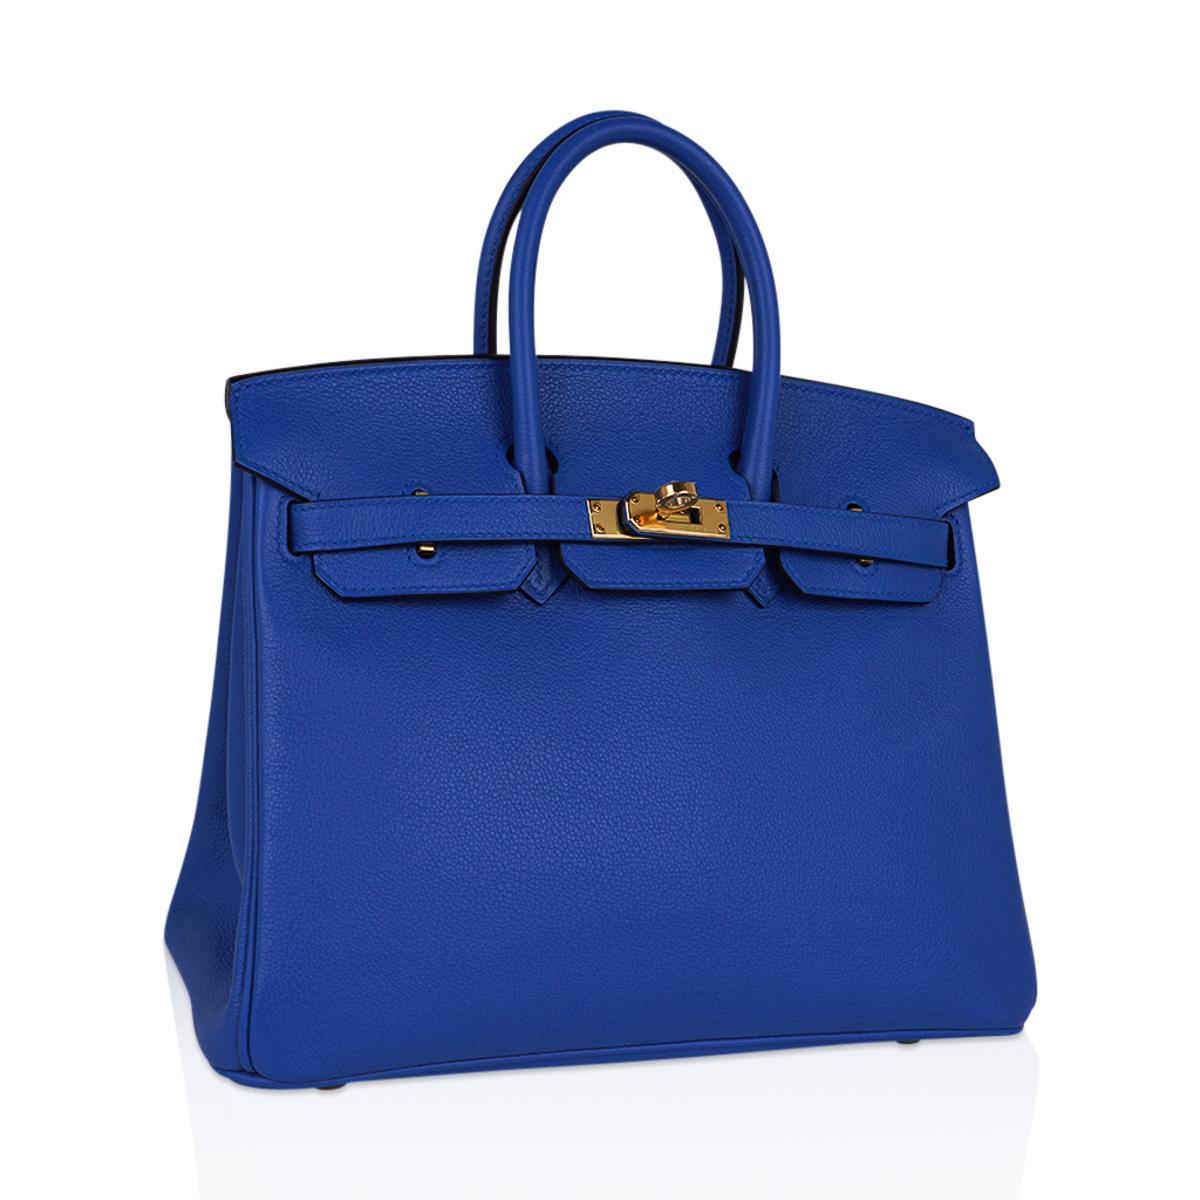 Mightychic offers an Hermes Birkin 25 bag featured in stunning Blue Zellige. 
Richly saturated Bleu Zellige has a beautiful depth of color in Novillo leather. 
Lush with gold hardware.
Comes with lock, keys, clochette, sleepers, raincoat, signature